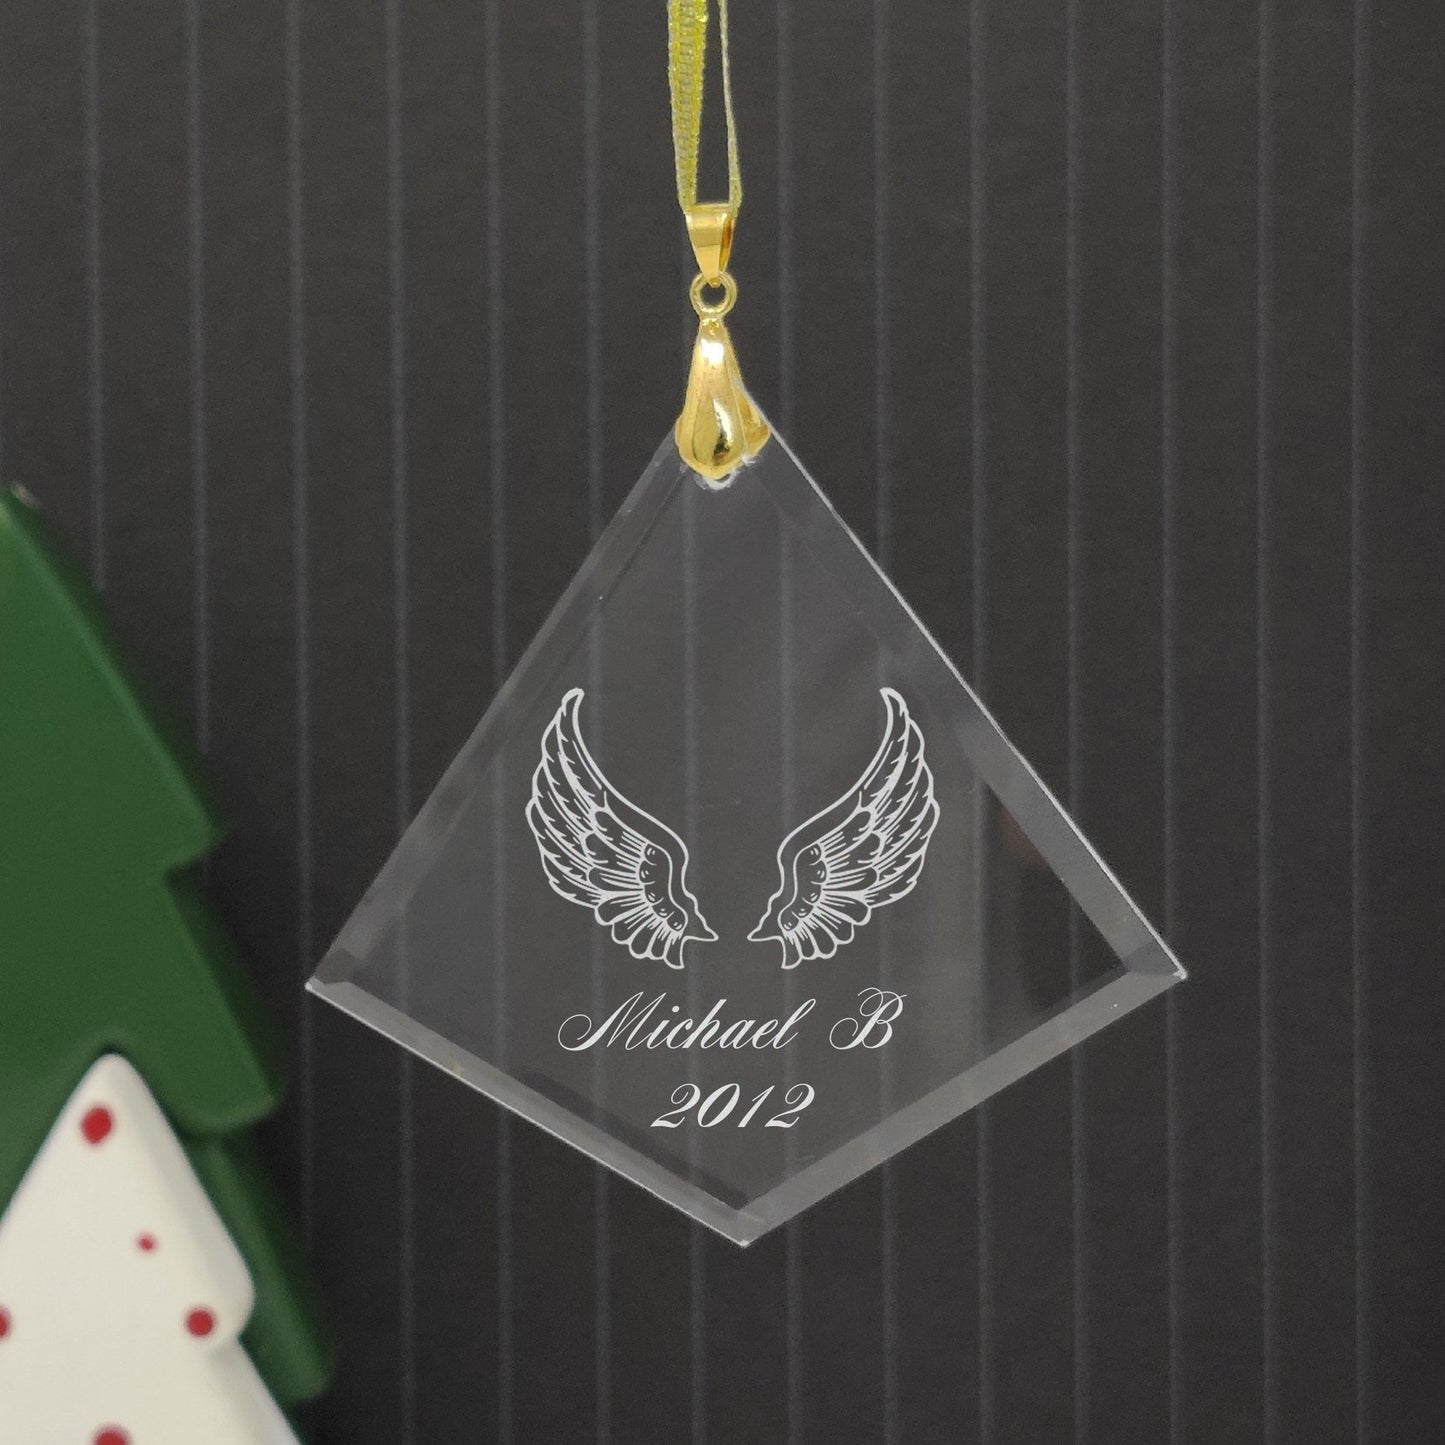 LaserGram Christmas Ornament, ATC Air Traffic Controller, Personalized Engraving Included (Diamond Shape)